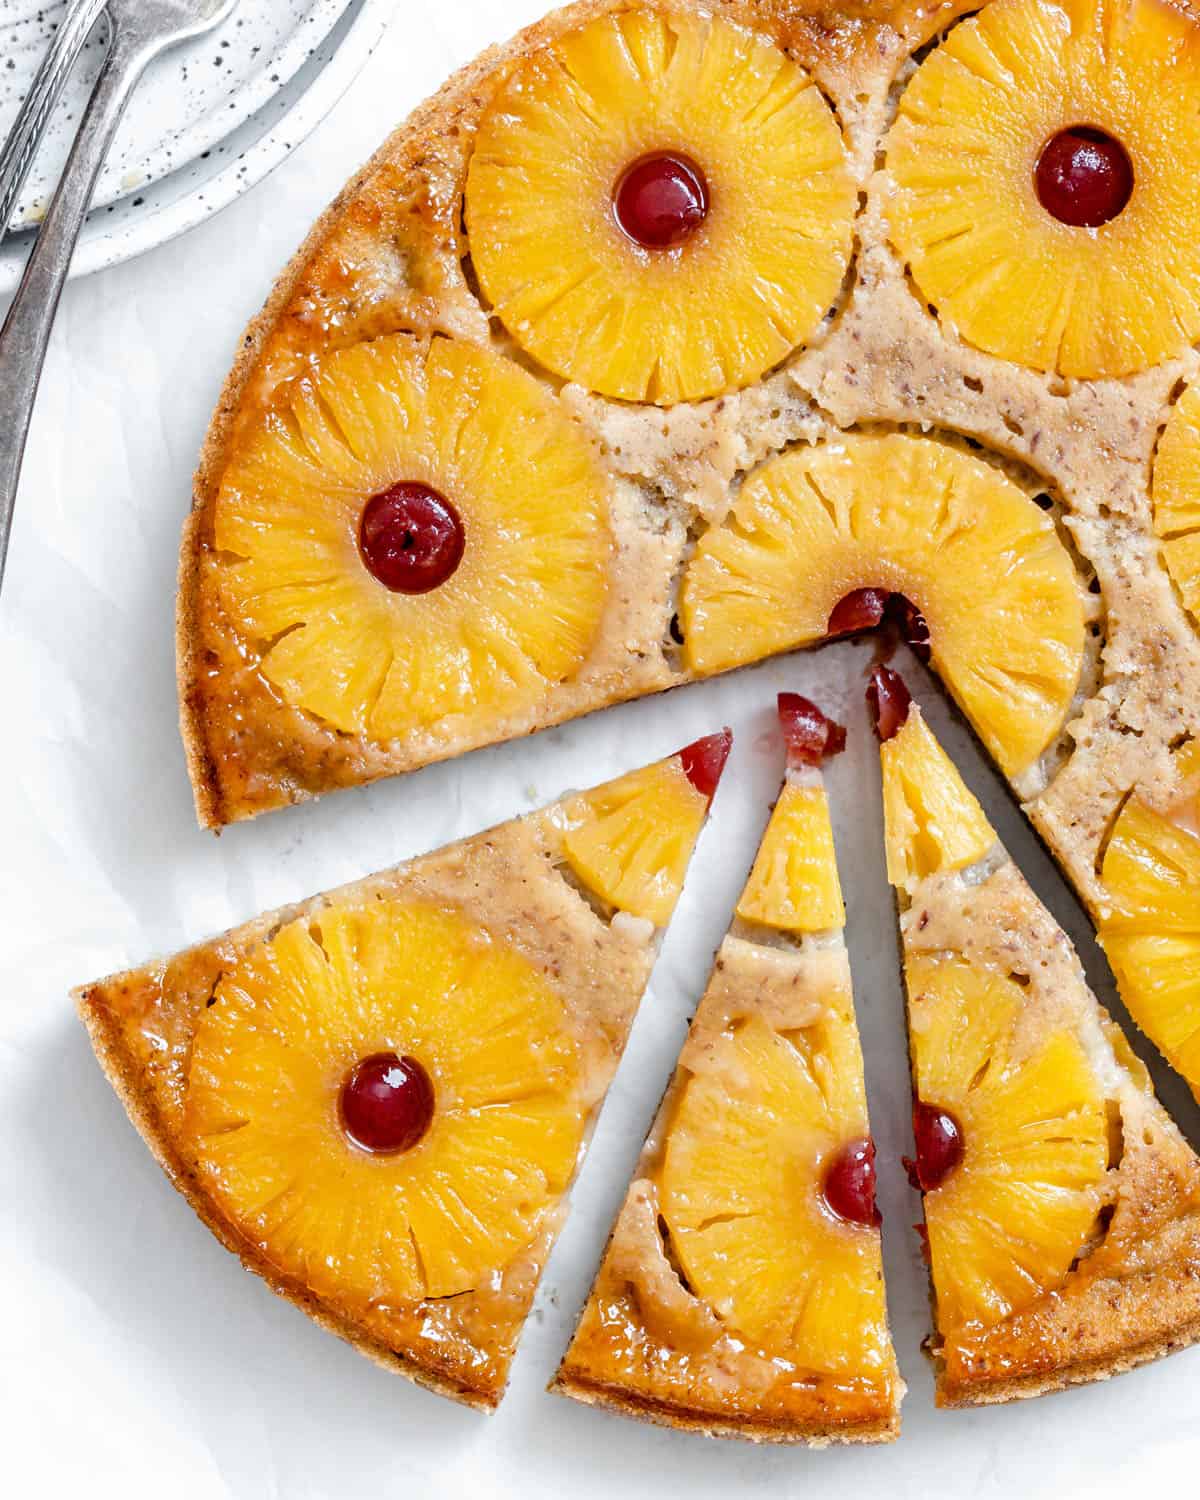 completed Vegan Pineapple Upside Down Cake sliced against a light surface